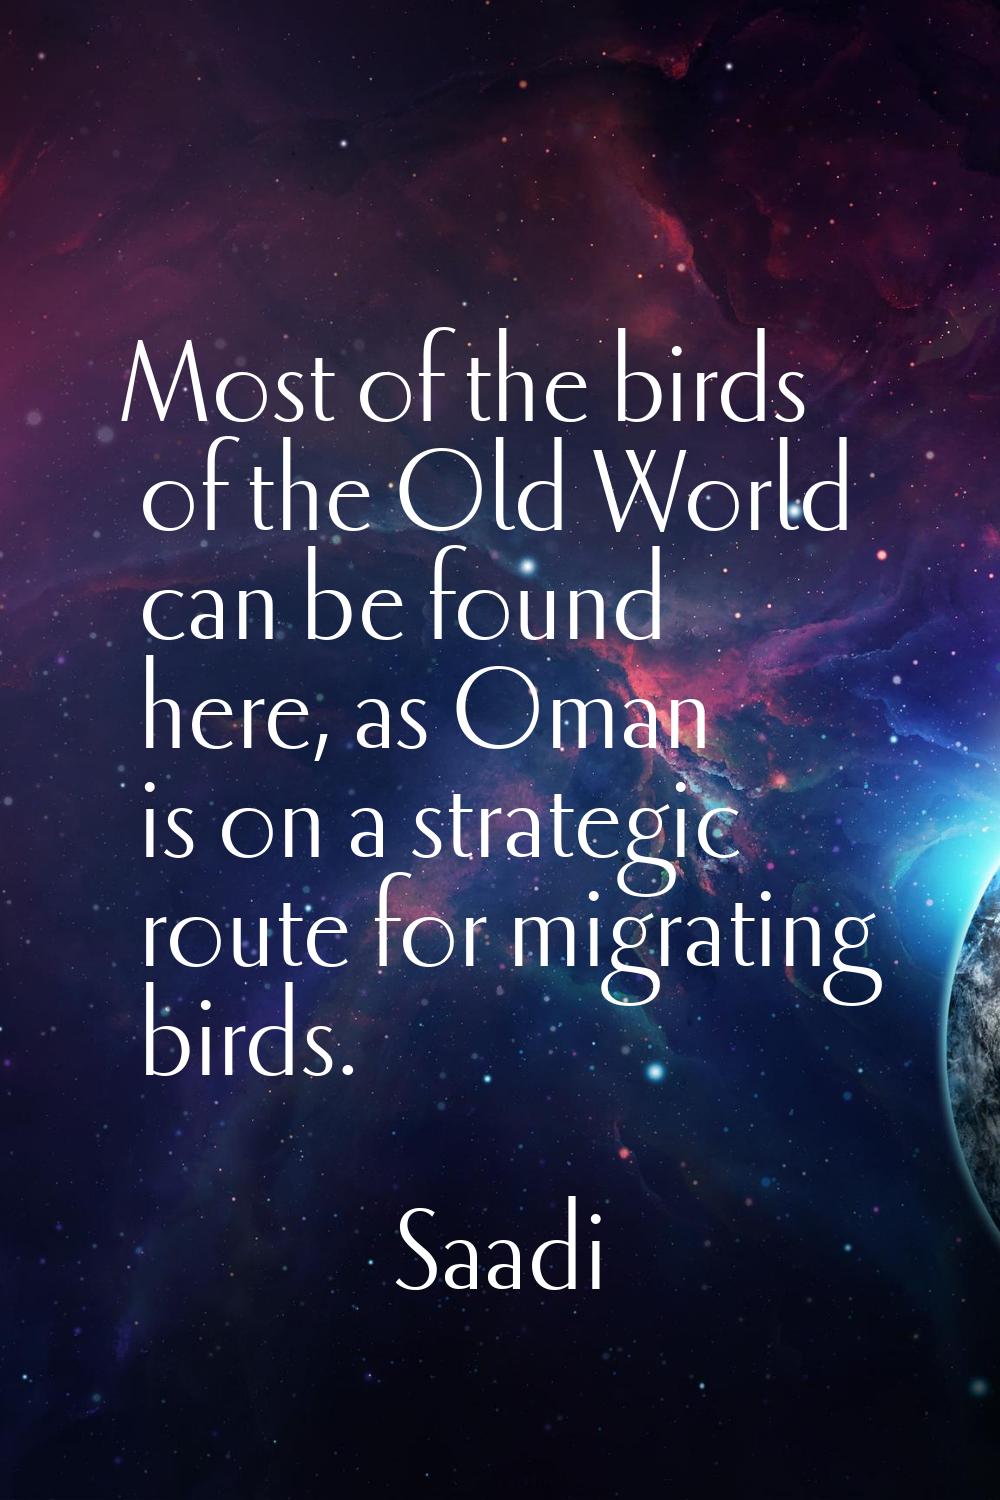 Most of the birds of the Old World can be found here, as Oman is on a strategic route for migrating